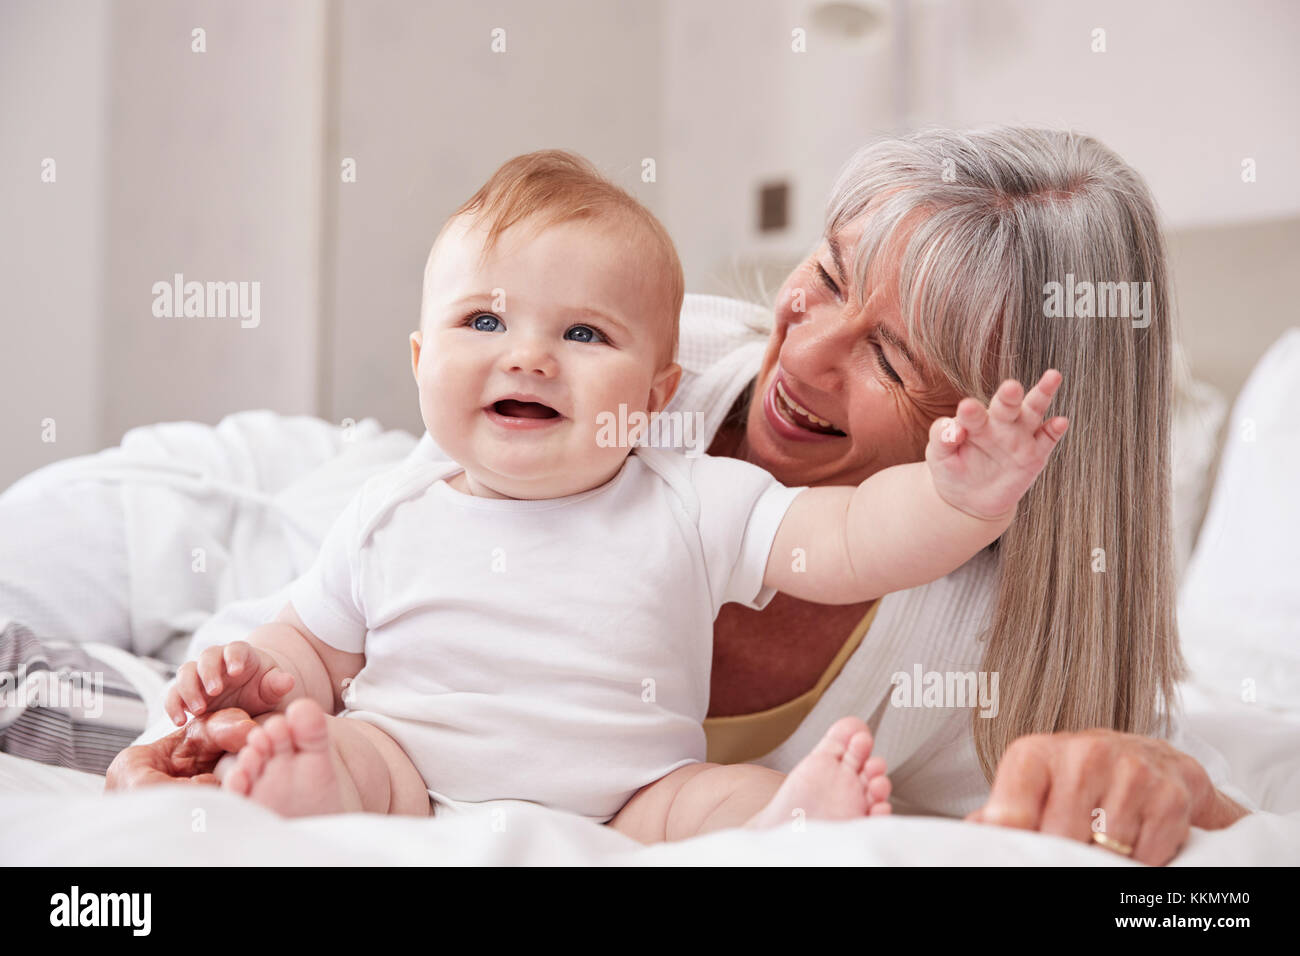 Grandmother Lying In Bed At Home Looking After Baby Grandson Stock Photo